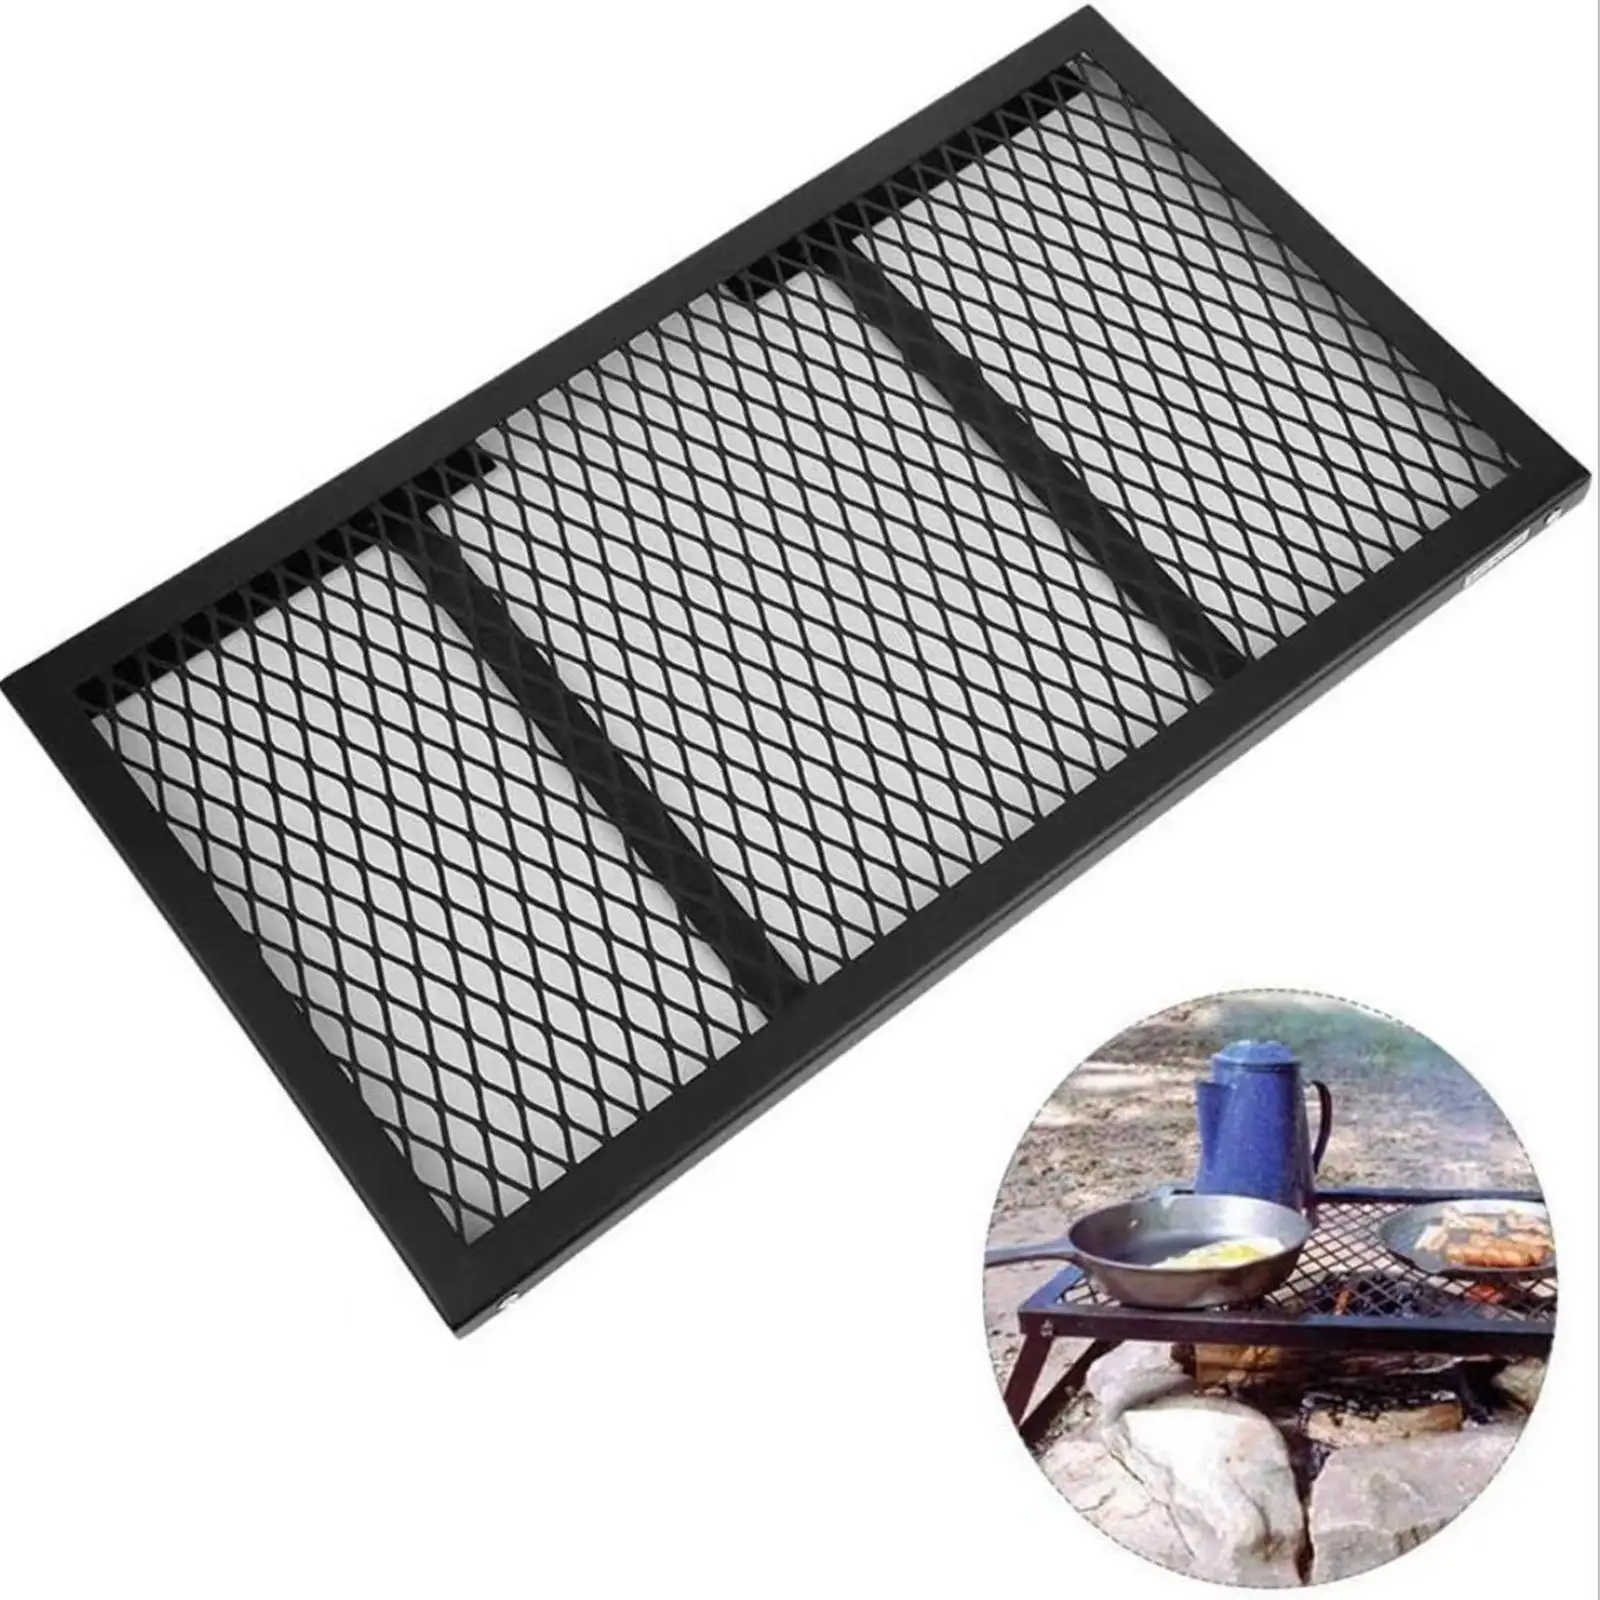 Lightweight Barbecue Net Desk Grill Mesh Table Charcoal Grill Plate Folding Mesh Table for Patio Camping Backyard Travel Party